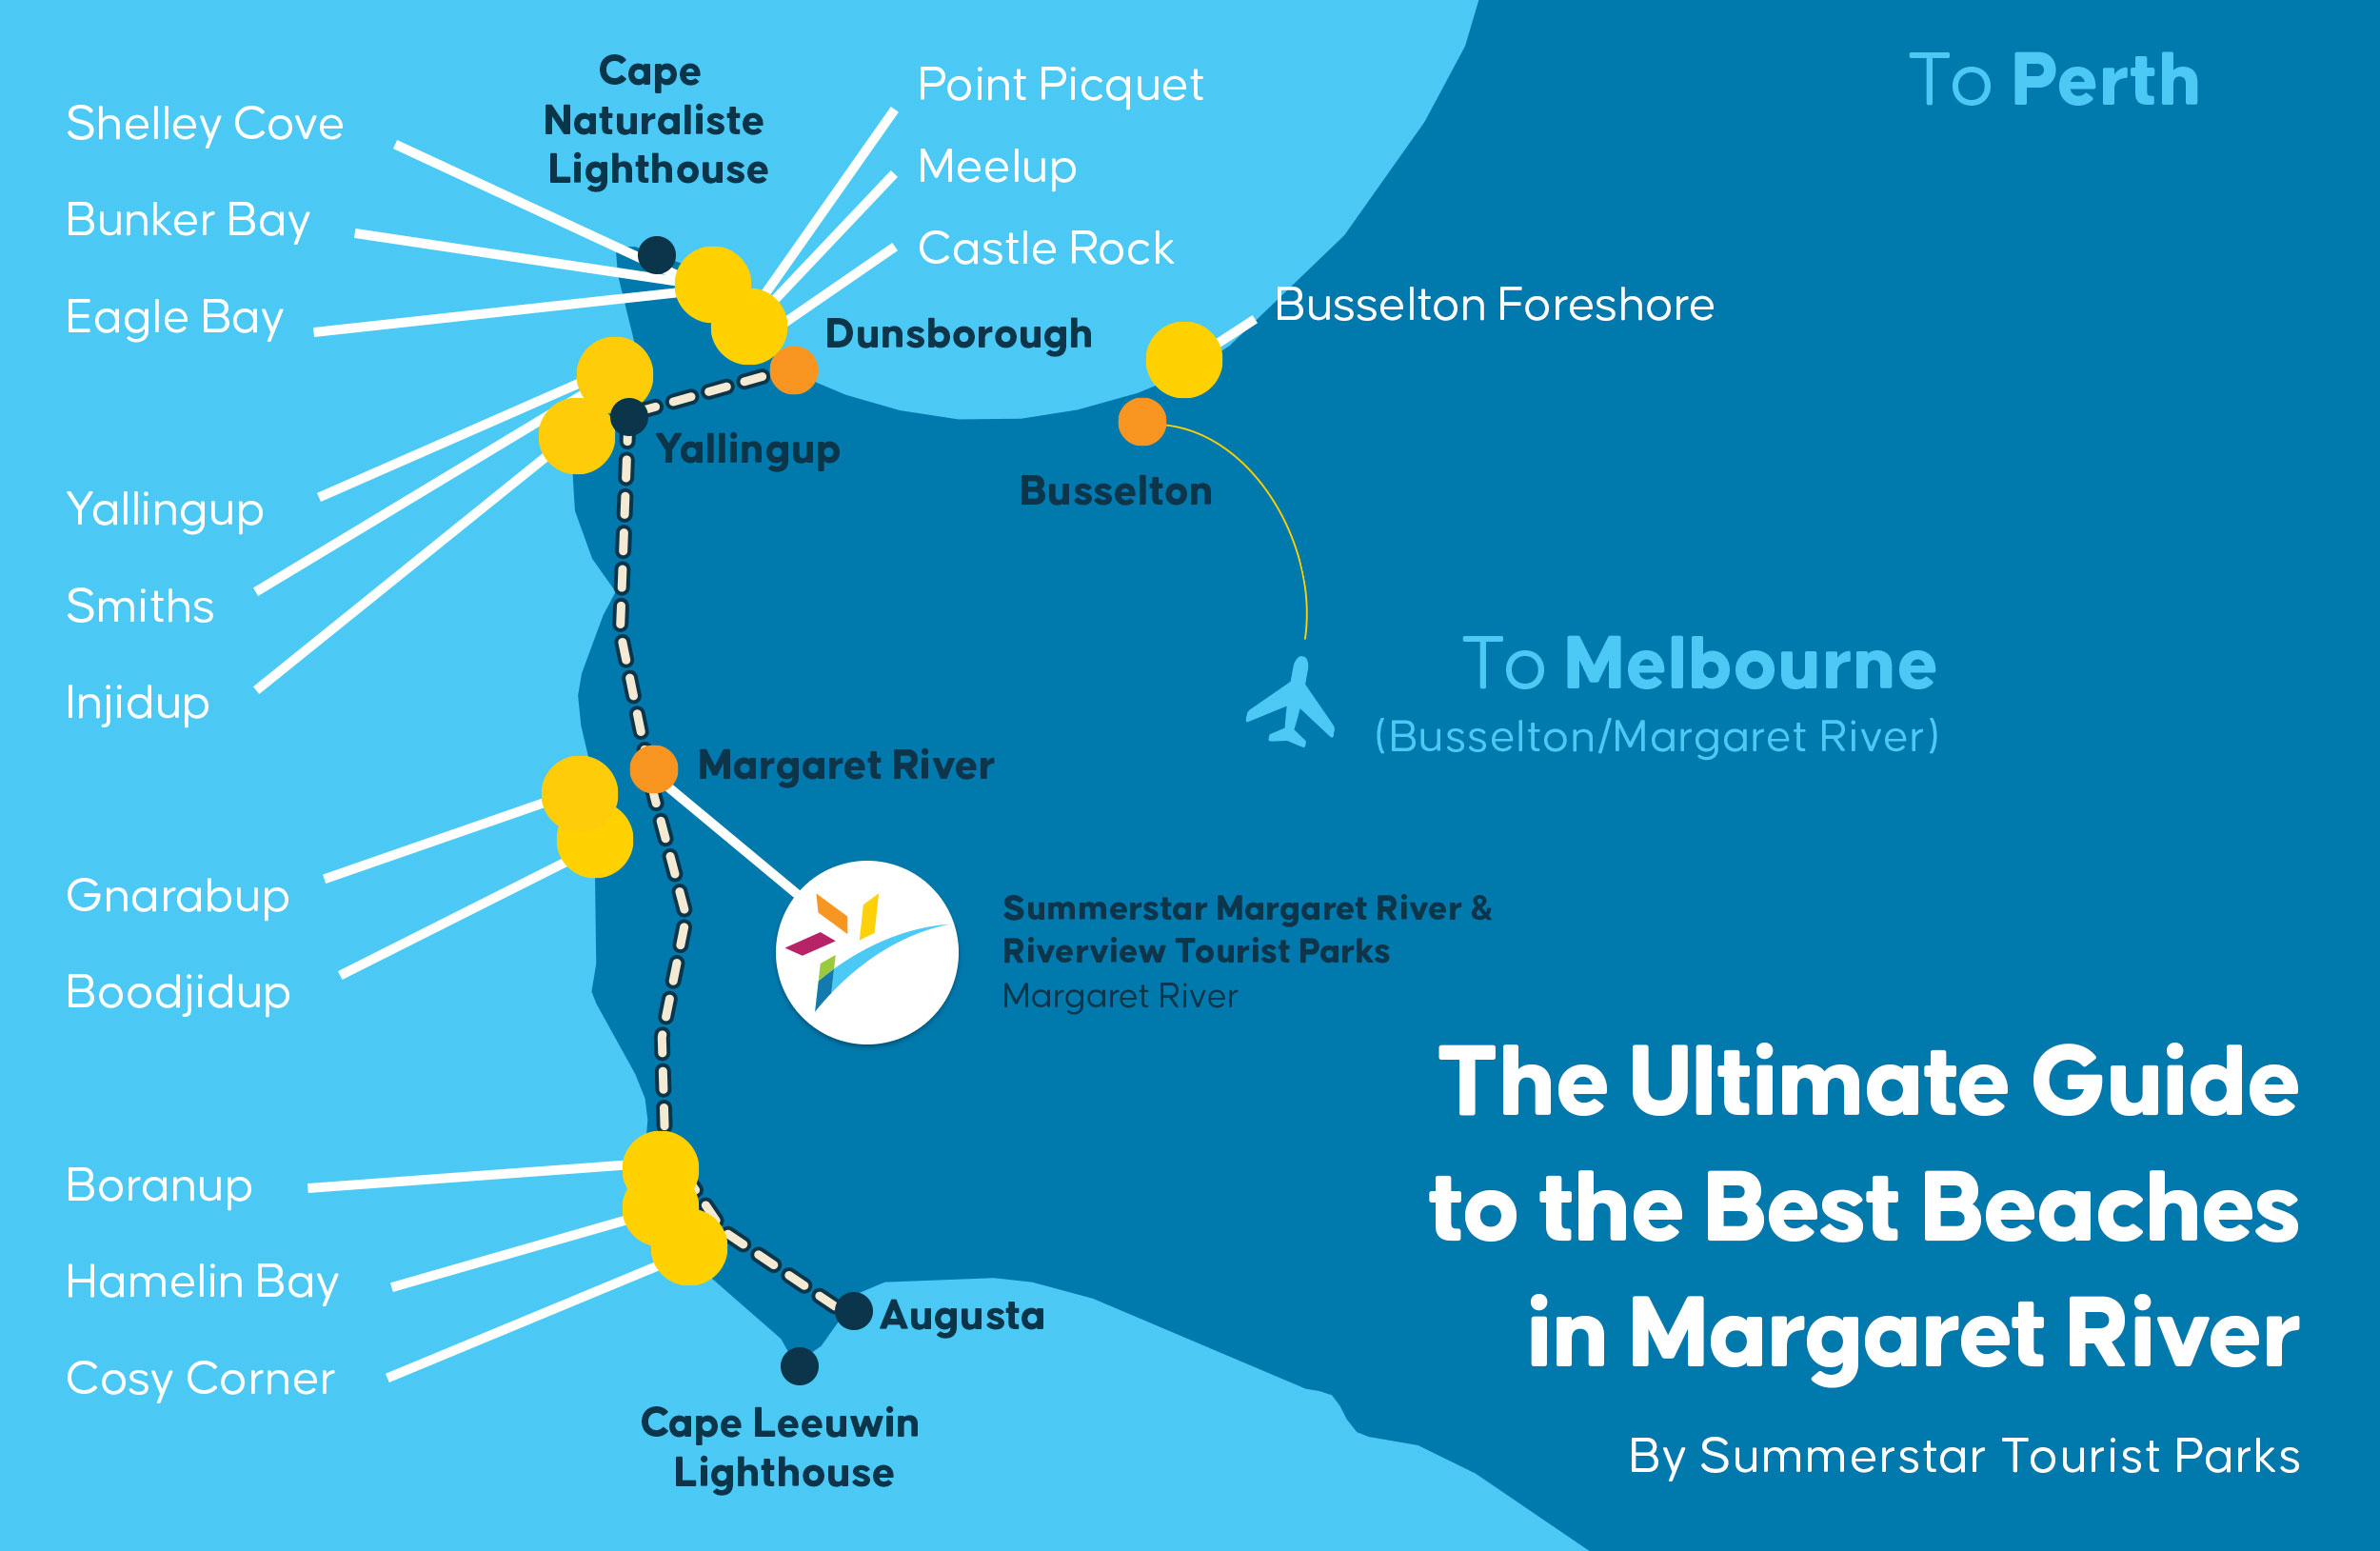 Infographic - The Ultimate Guide to the Best Beaches in Margaret River.